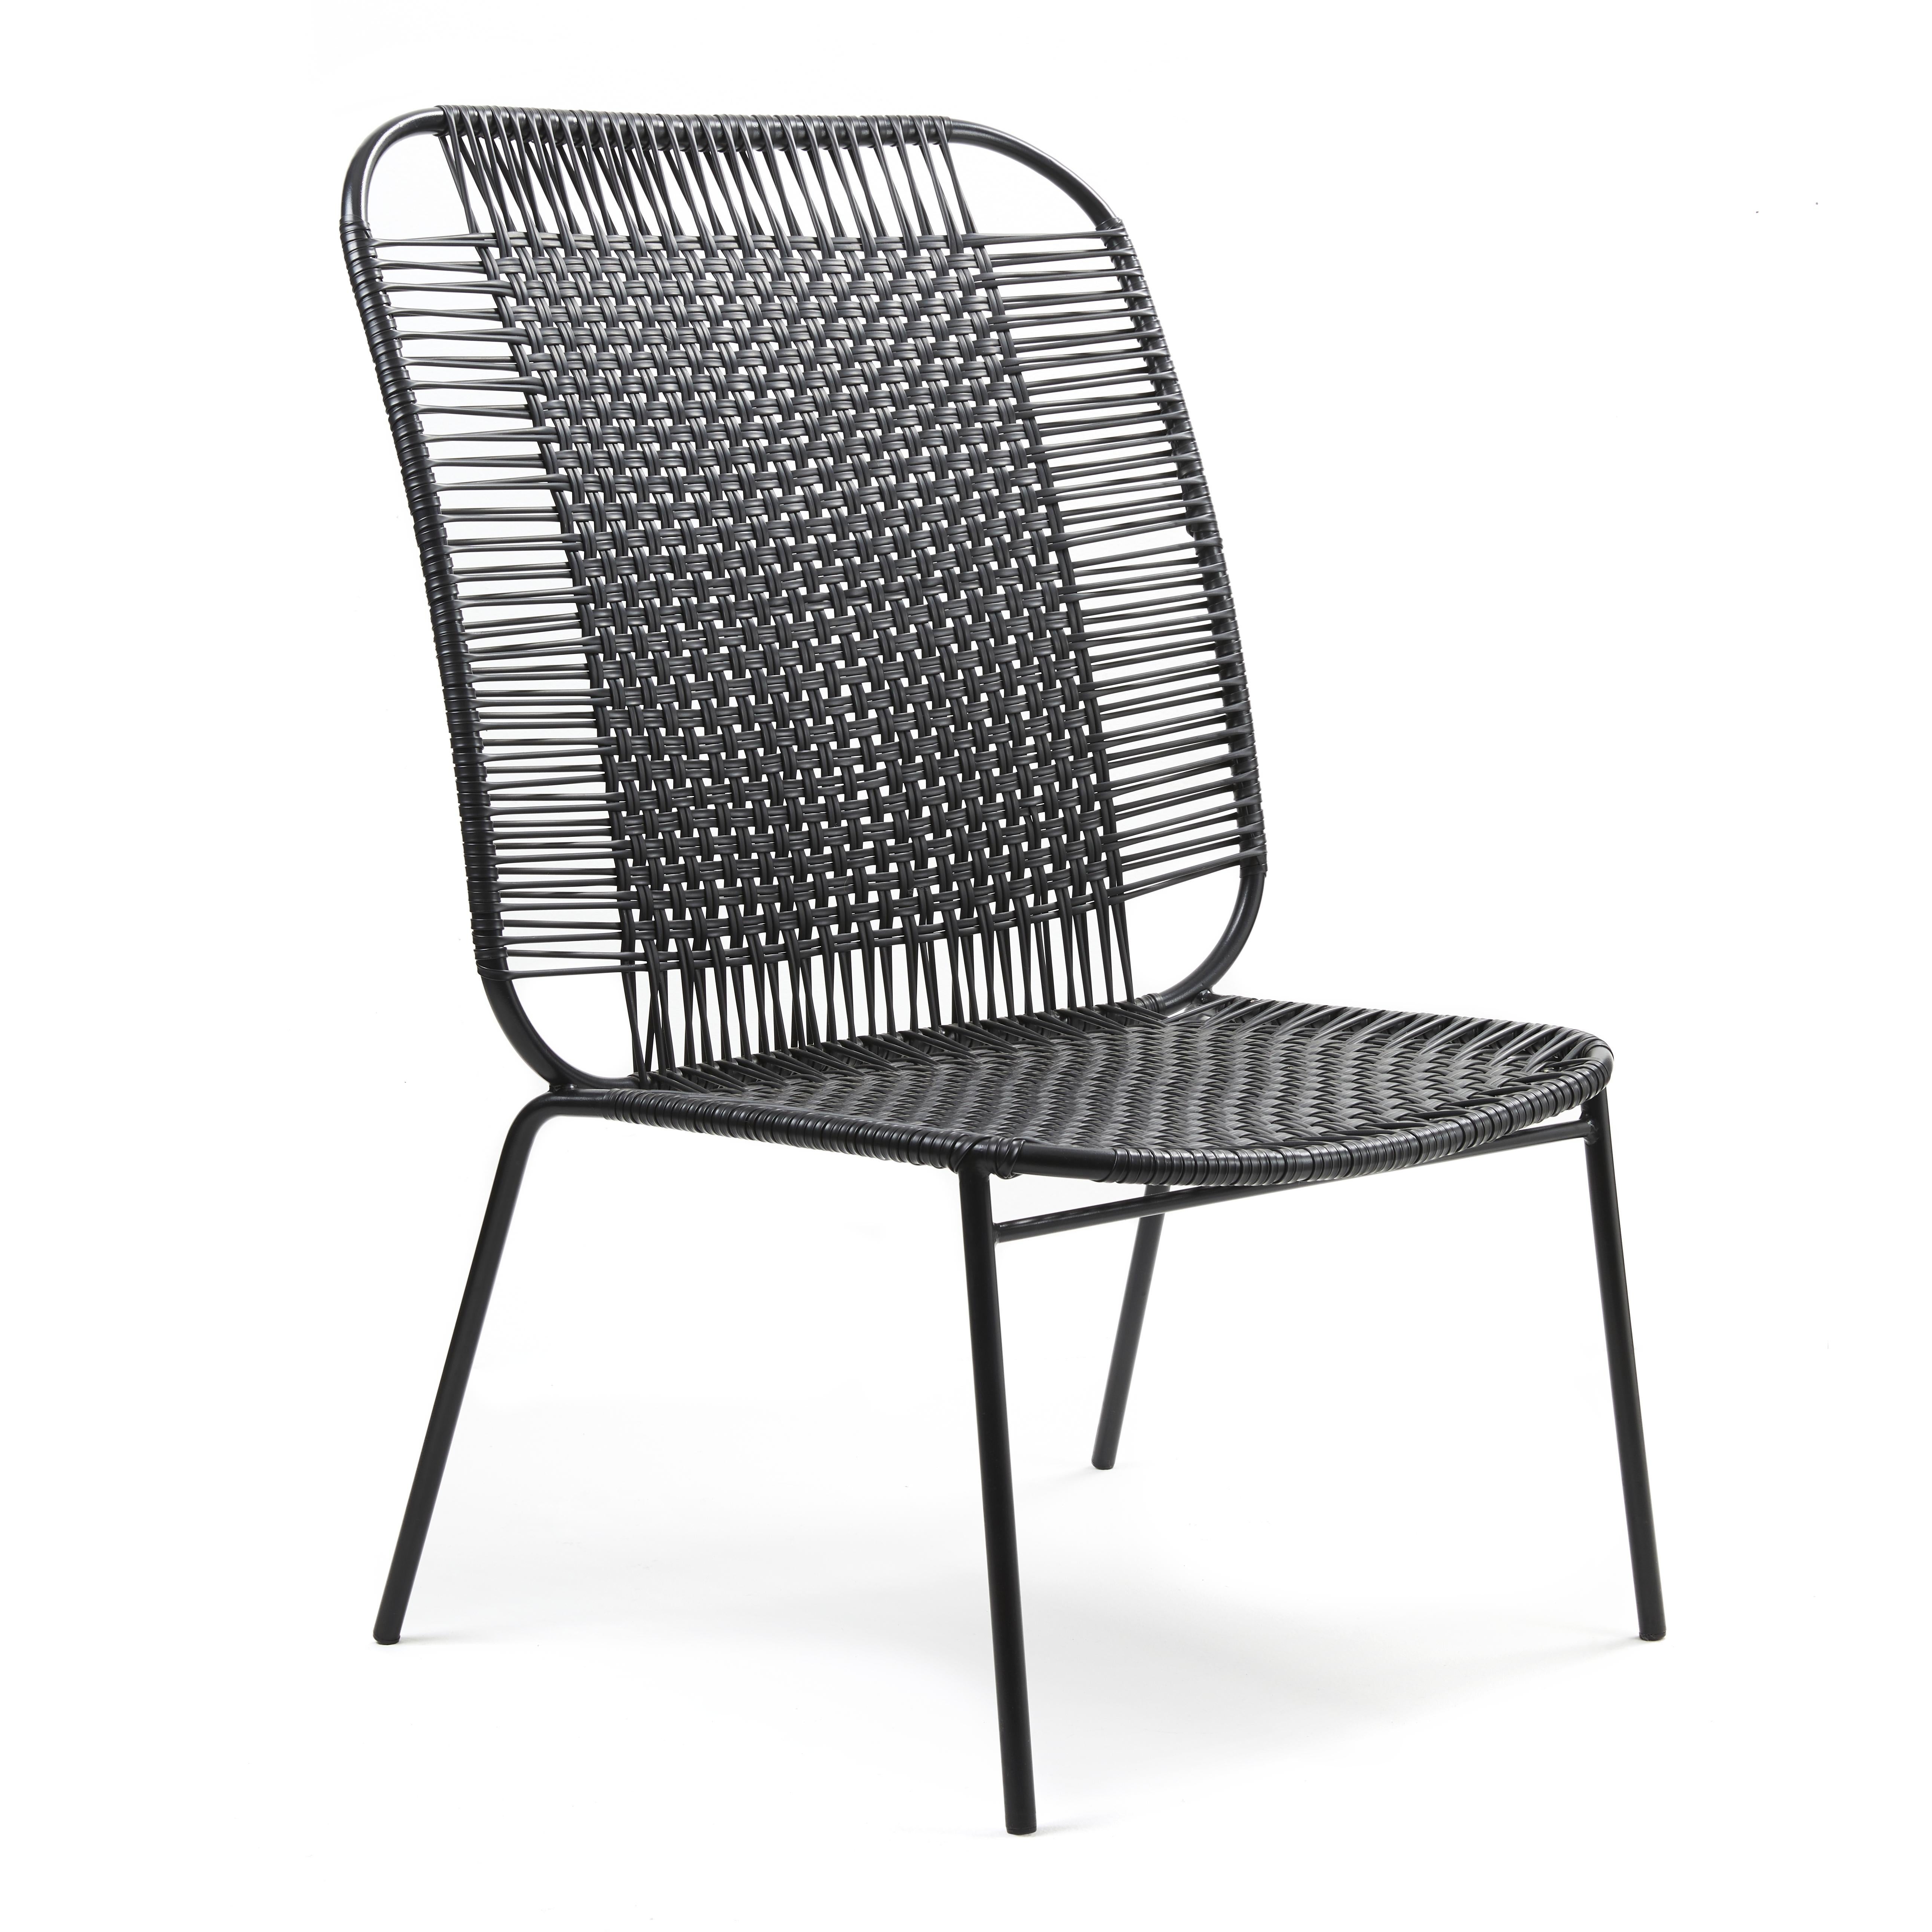 Black Cielo lounge high chair by Sebastian Herkner
Materials: Galvanized and powder-coated tubular steel. PVC strings are made from recycled plastic.
Technique: Made from recycled plastic and weaved by local craftspeople in Cartagena, Colombia.